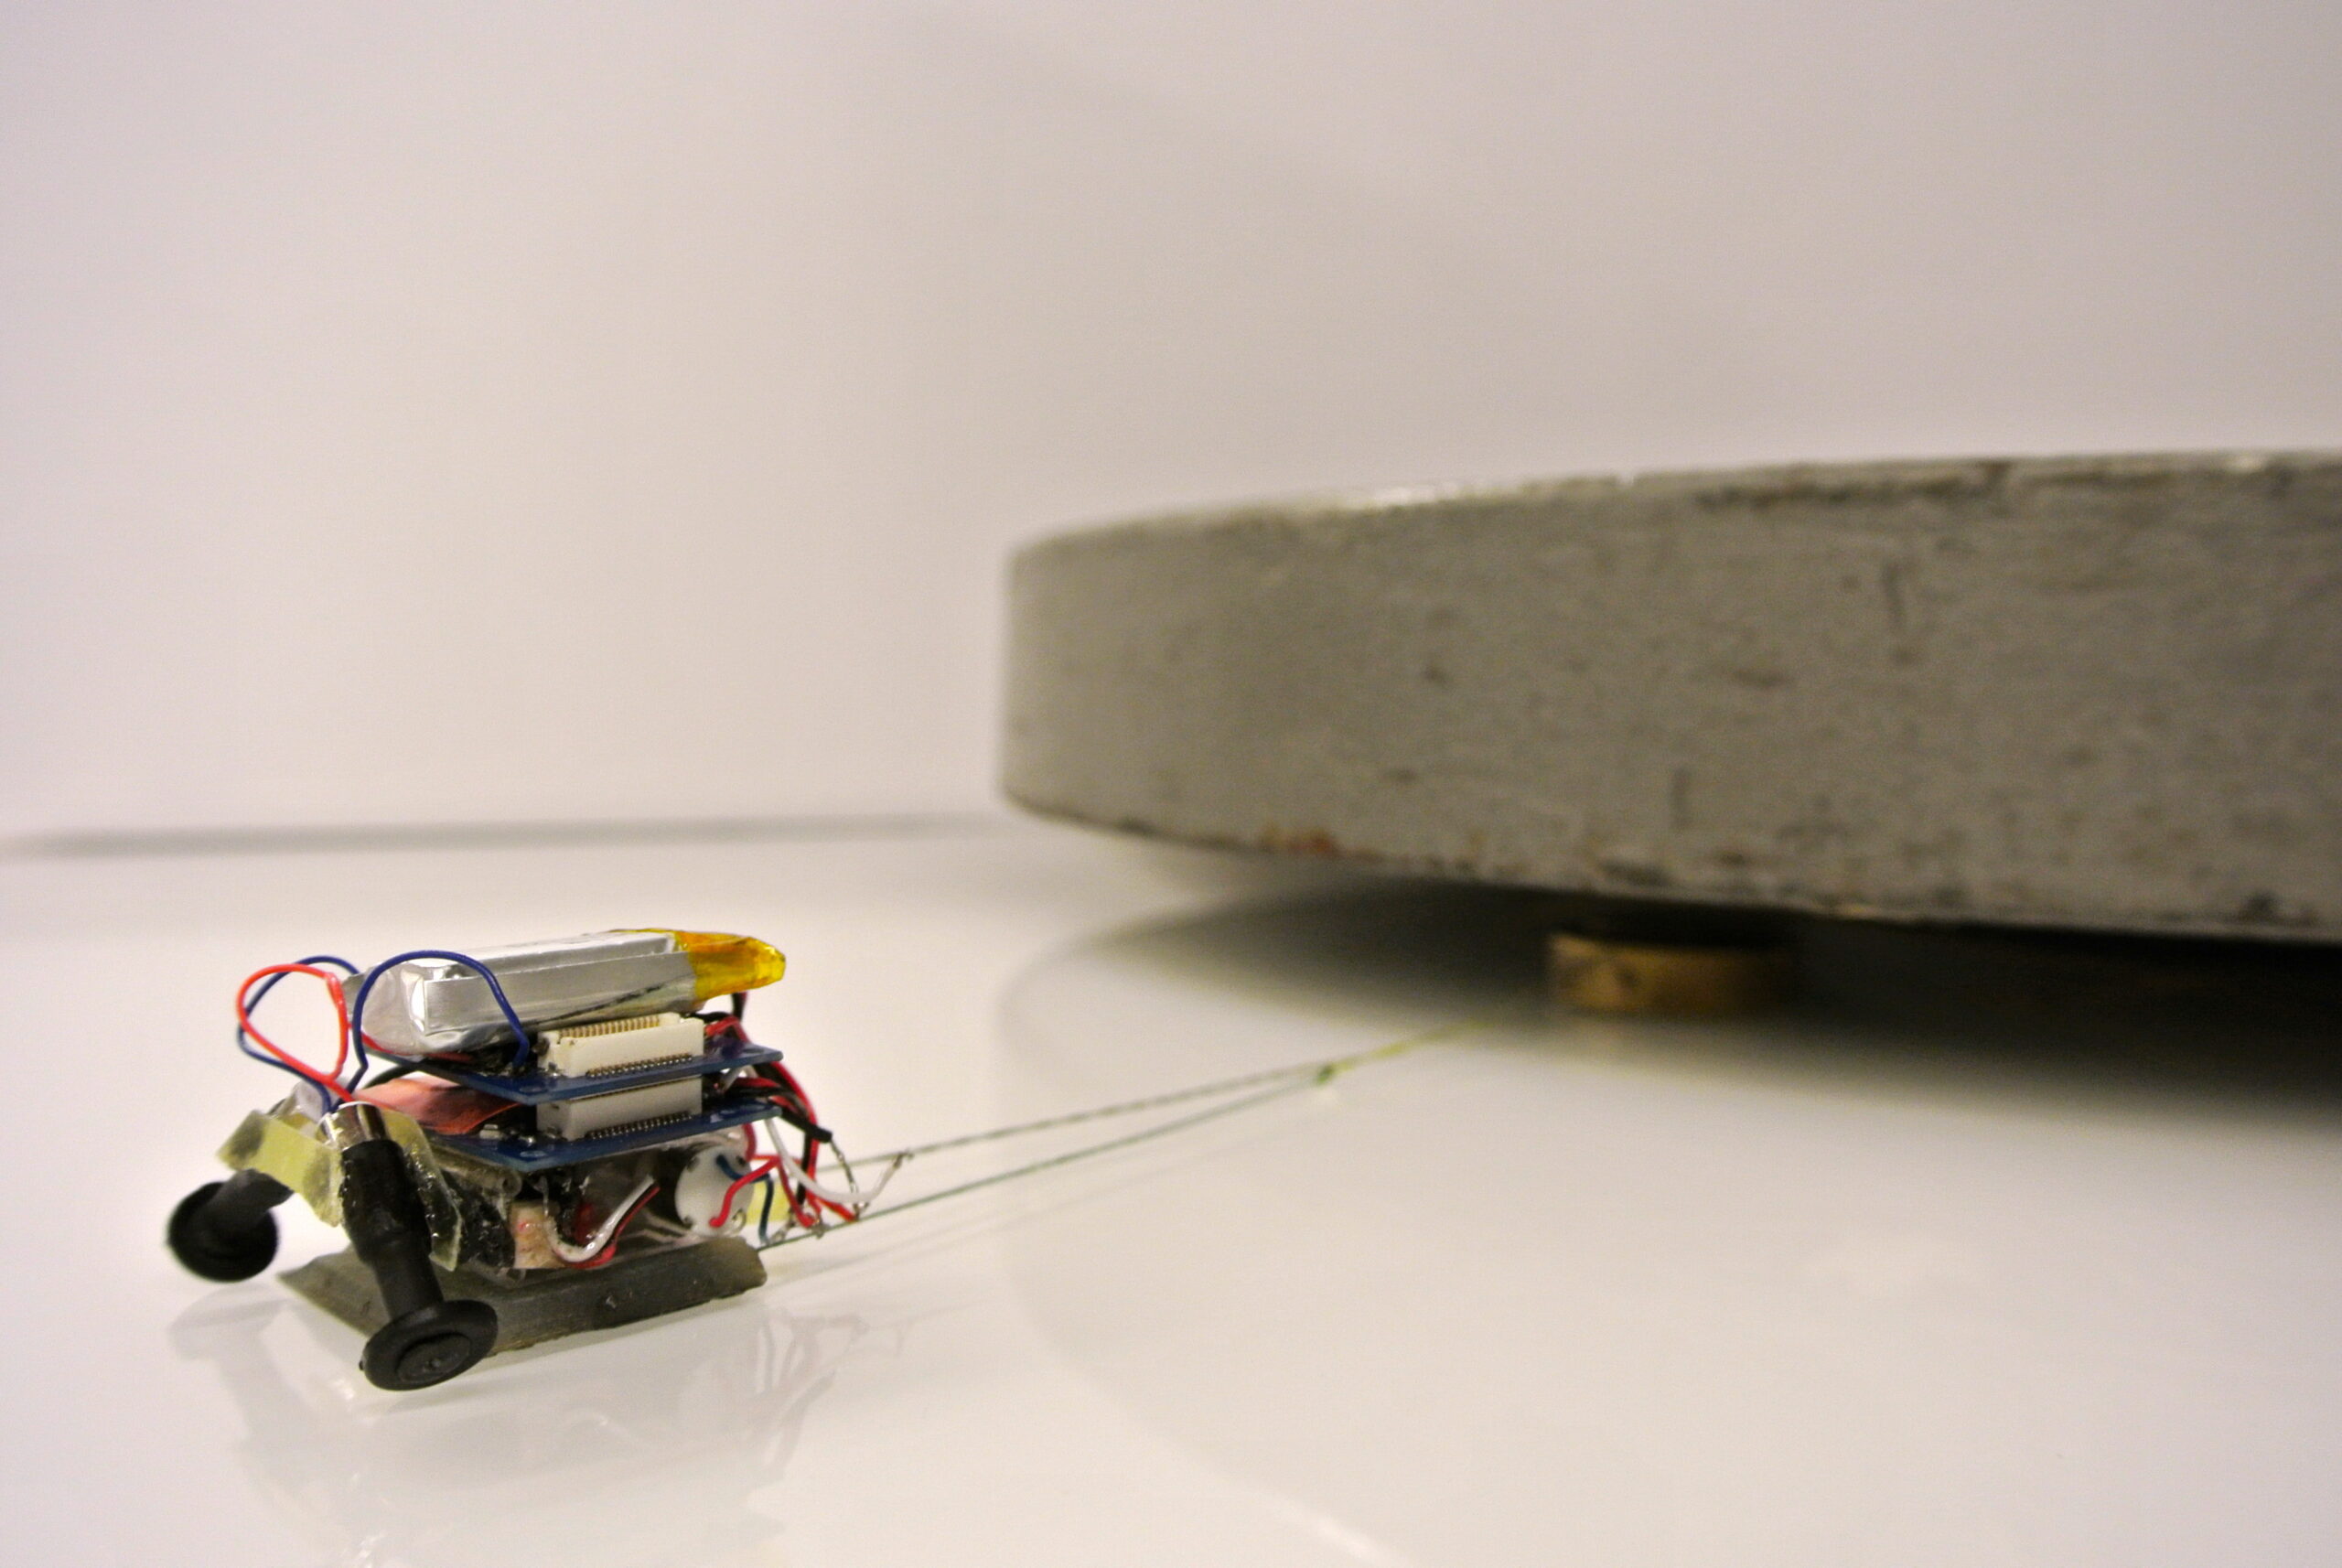 Watch A Tiny Robot Pull Something Nearly 2,000 Times Its Size [Video]